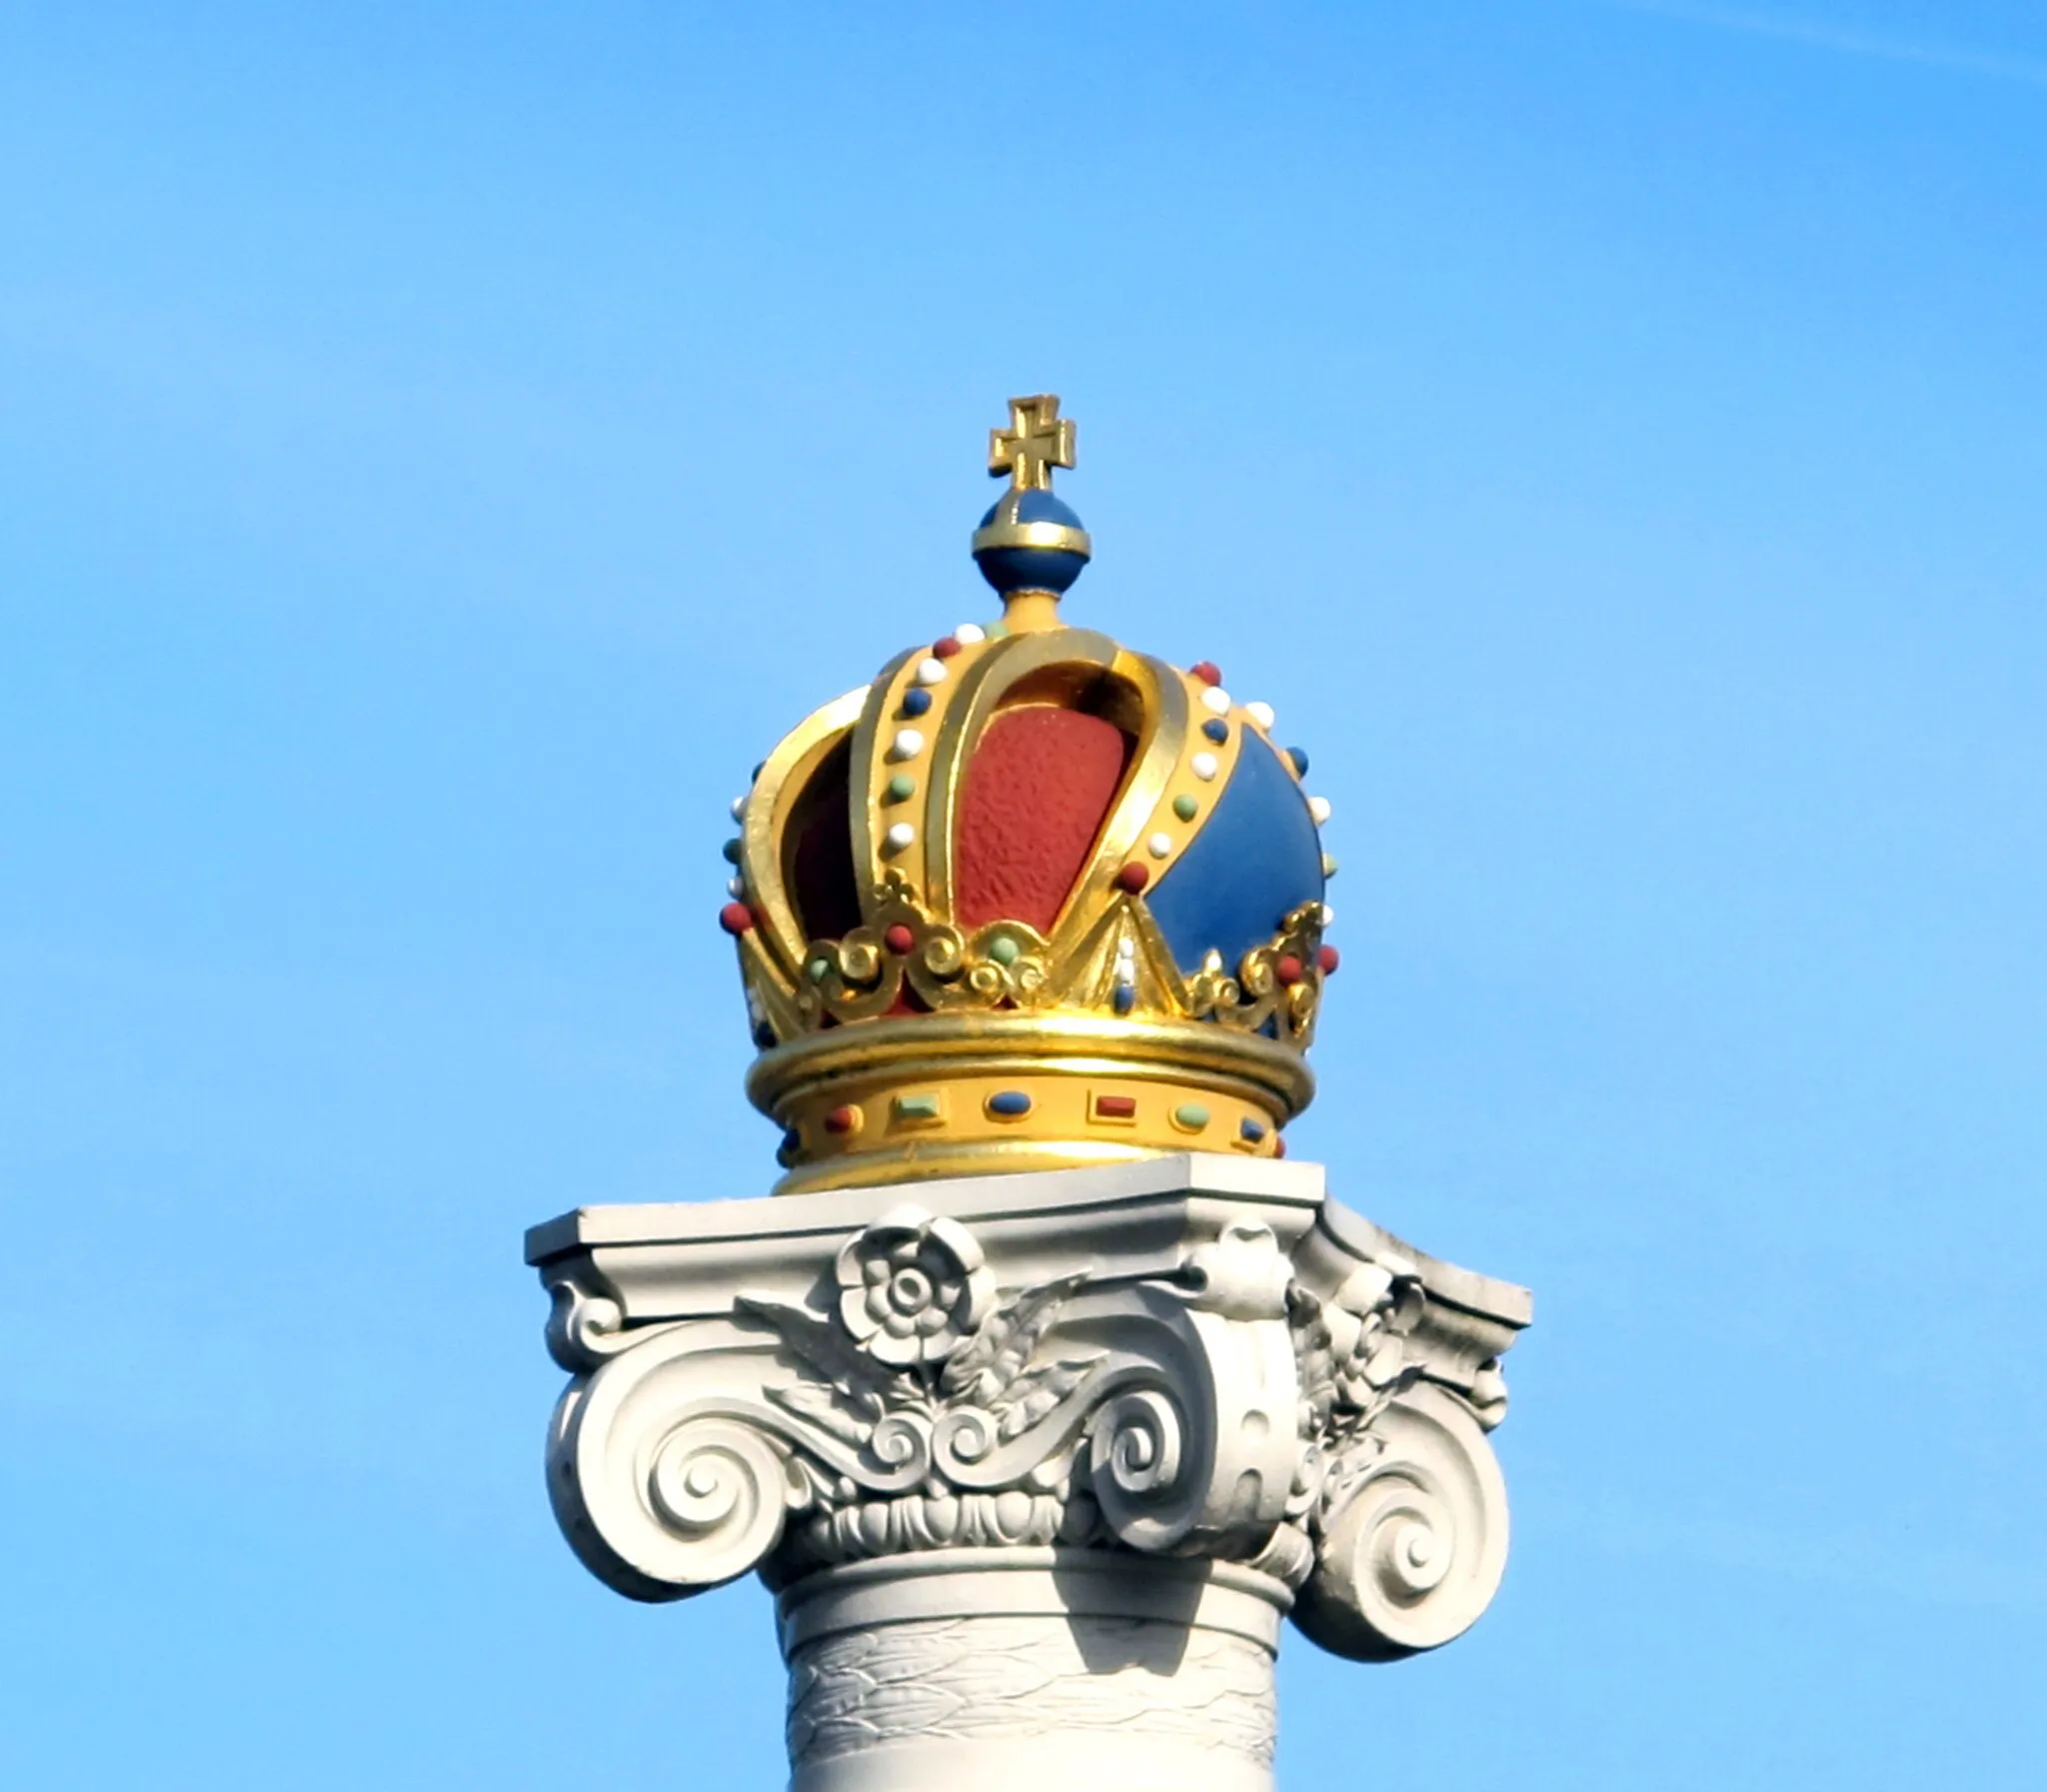 Photo showing: Lantern in the shape of a crown on the Blauwbrug (Blue Bridge) in Amsterdam